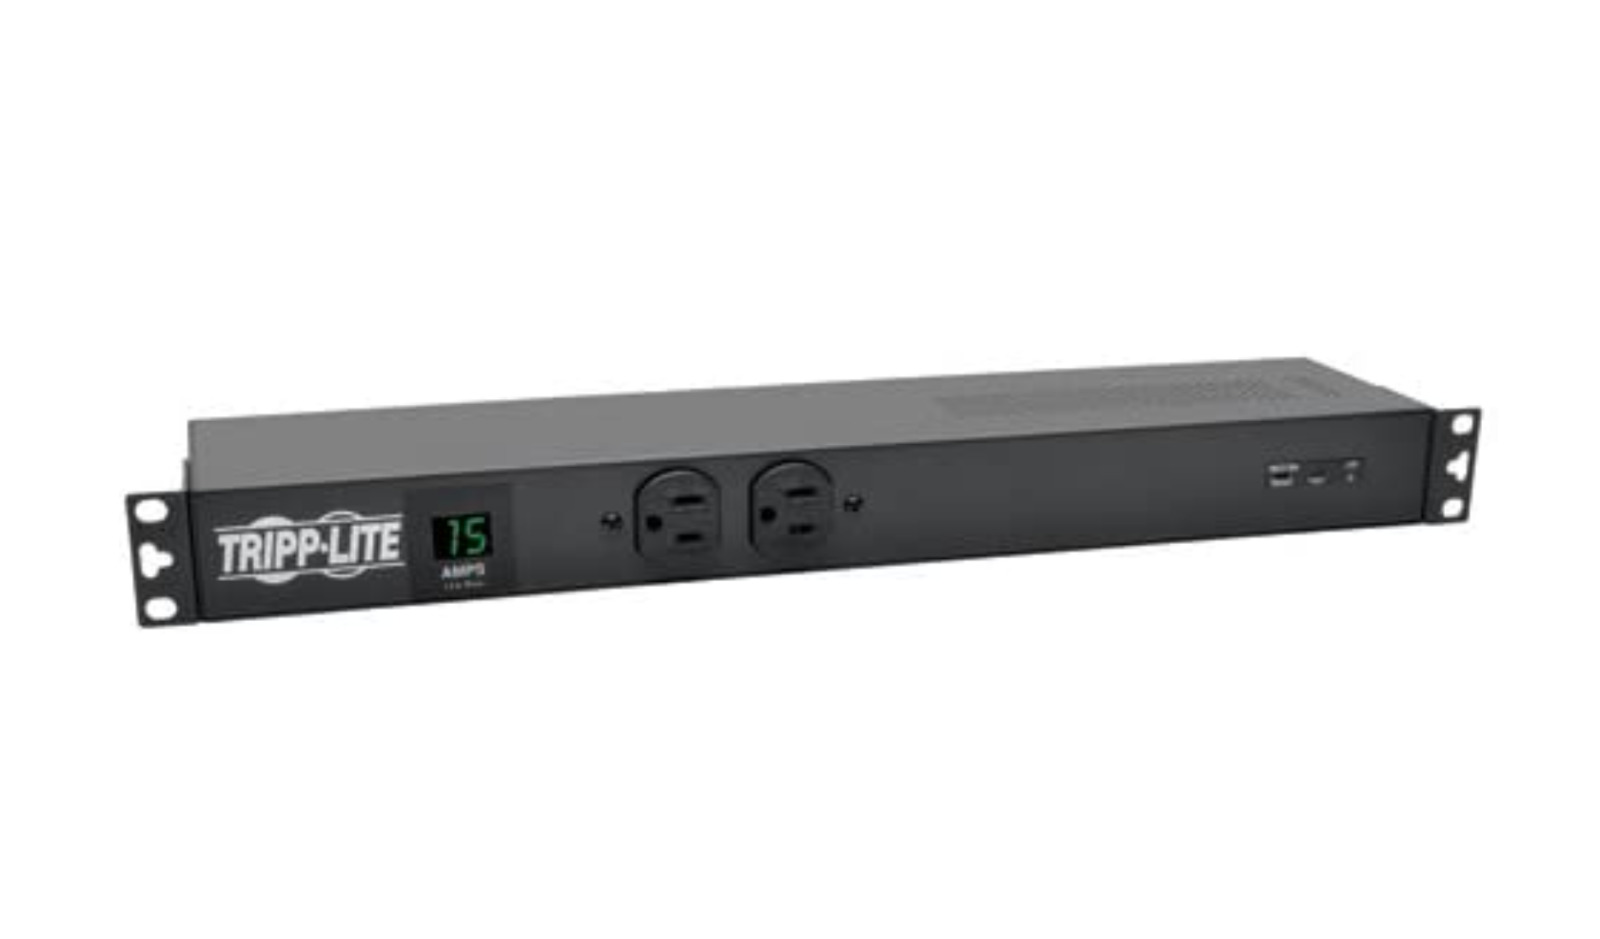 Tripp Lite Metered PDU, 15A, Isobar Surge Suppression, 14 Outlets (5-15R)